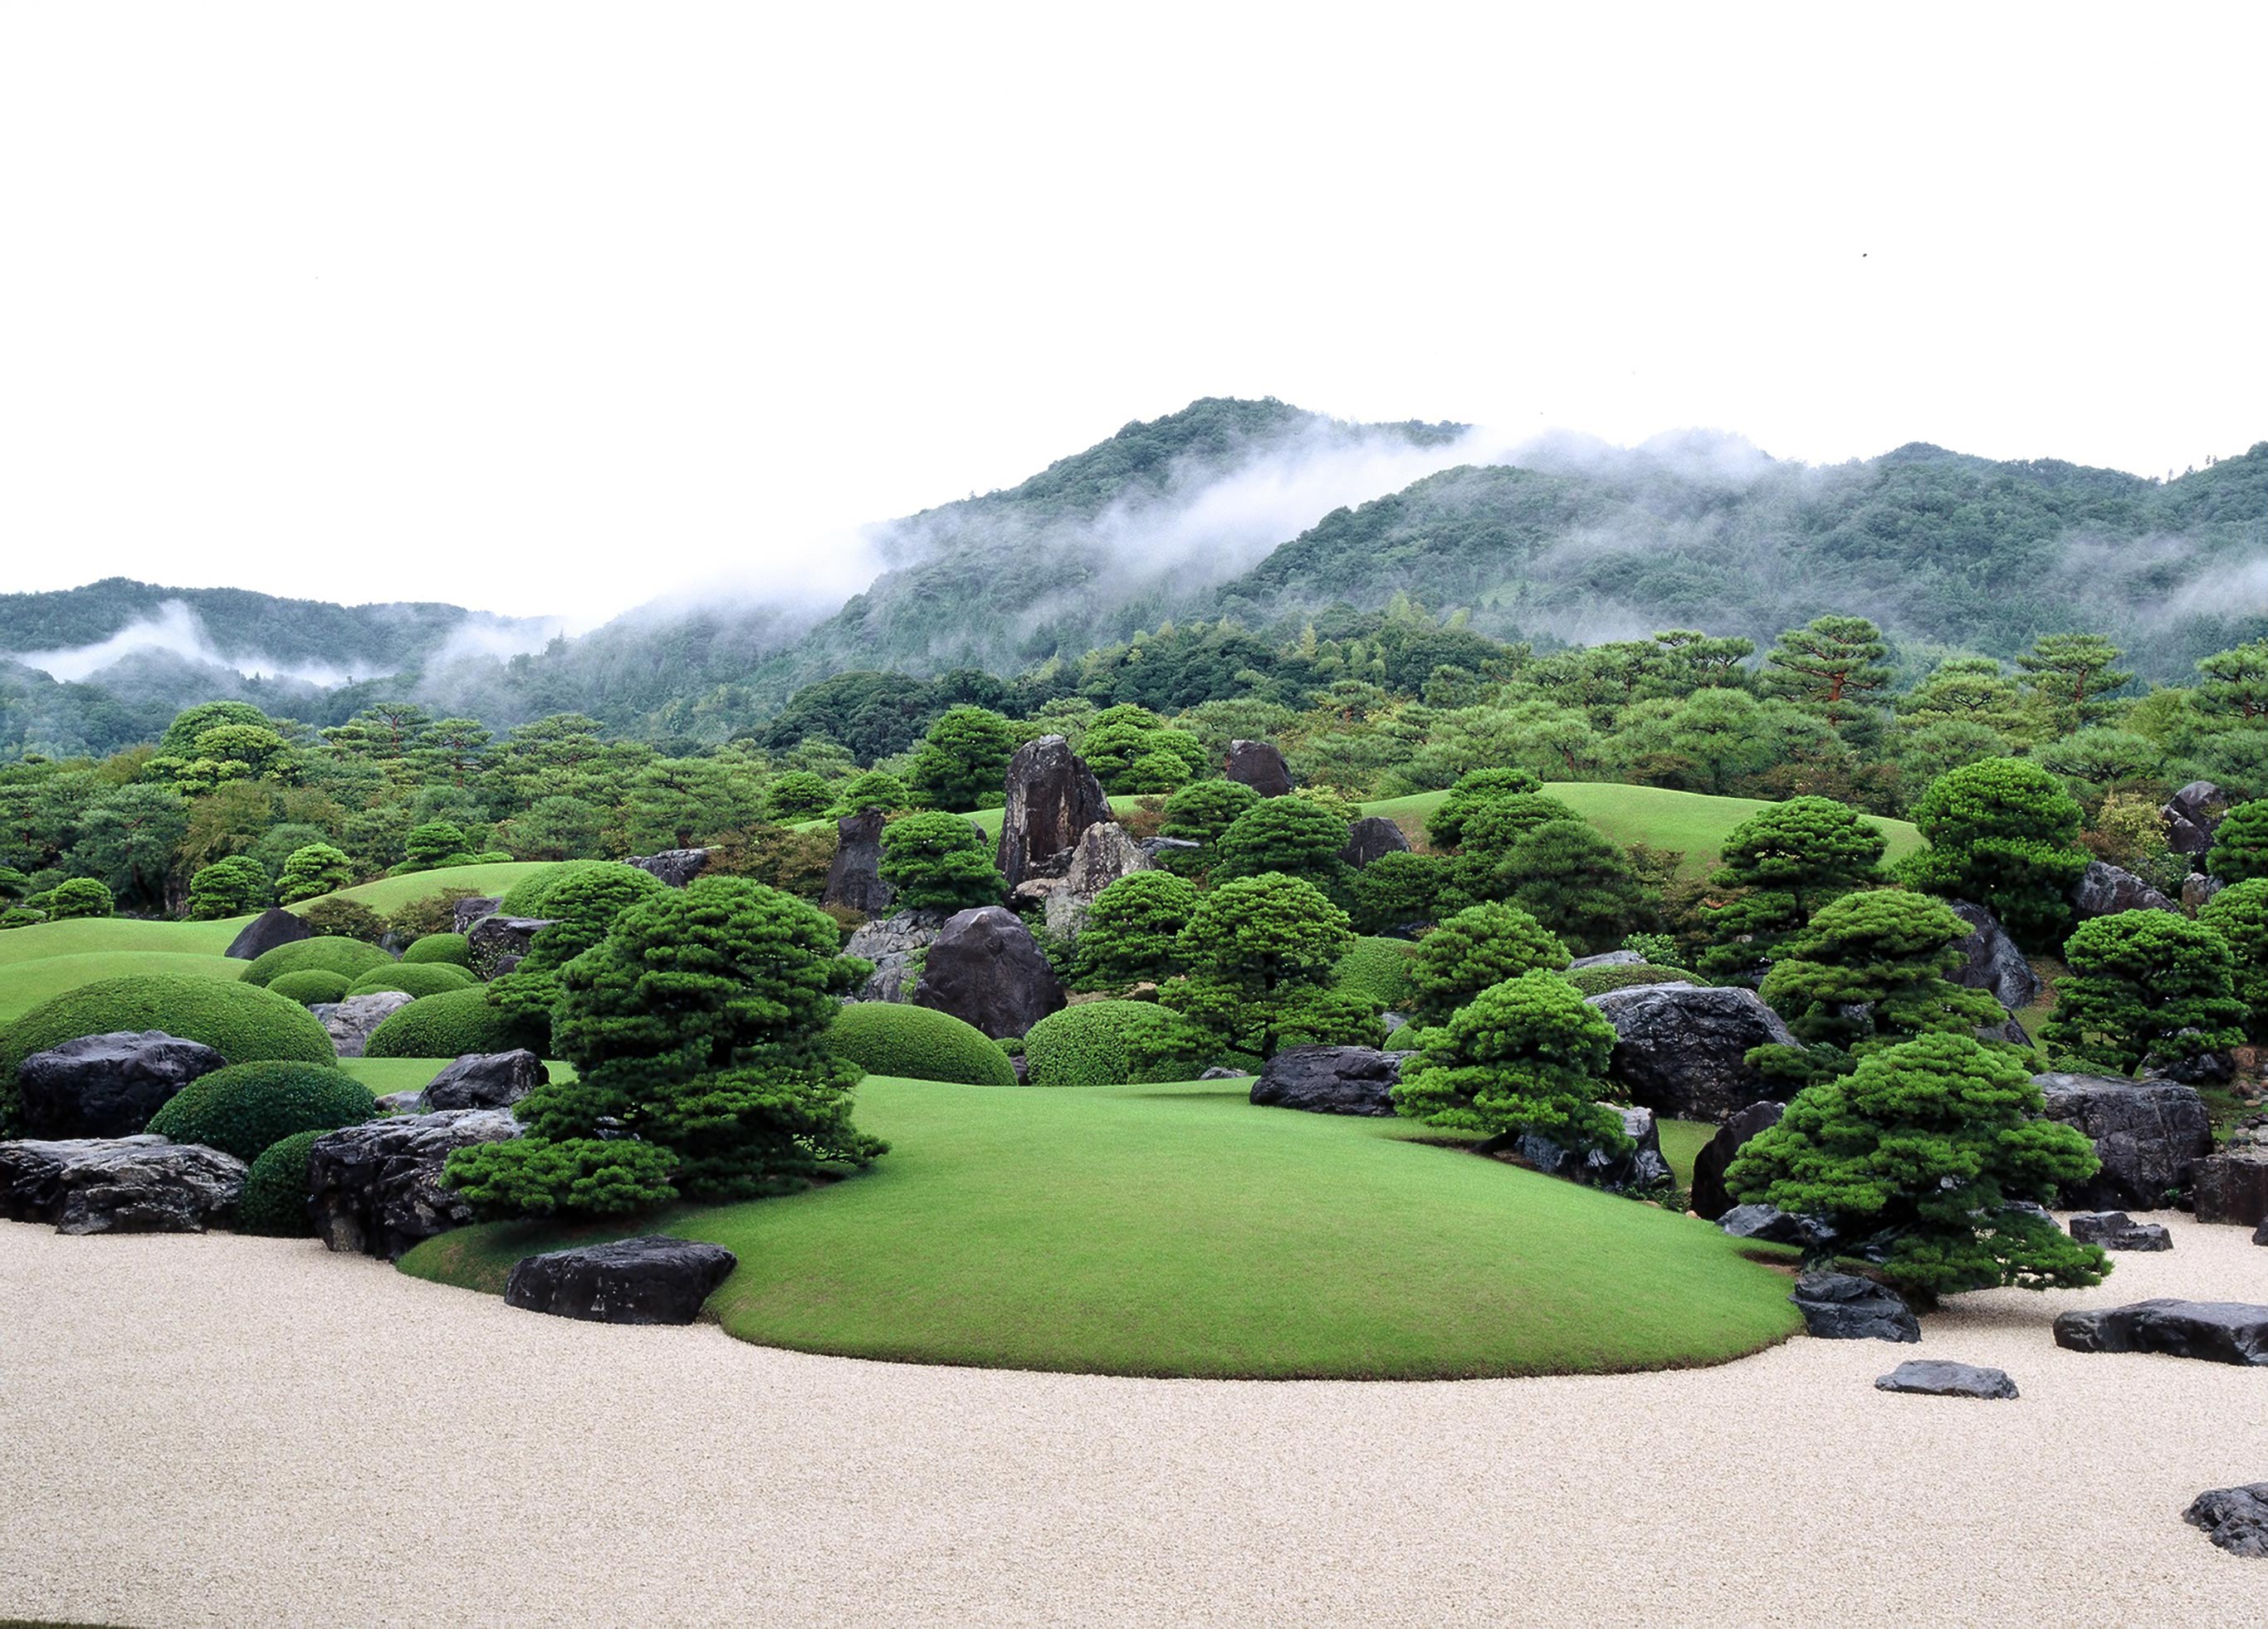 6 gardens are maintained at the Museum, including the White Sand and Blue Pines Garden inspired by the works  of Taikan Yokoyama and a Karesansui Garden (Dry Landscape Garden made up only of rocks and sand).